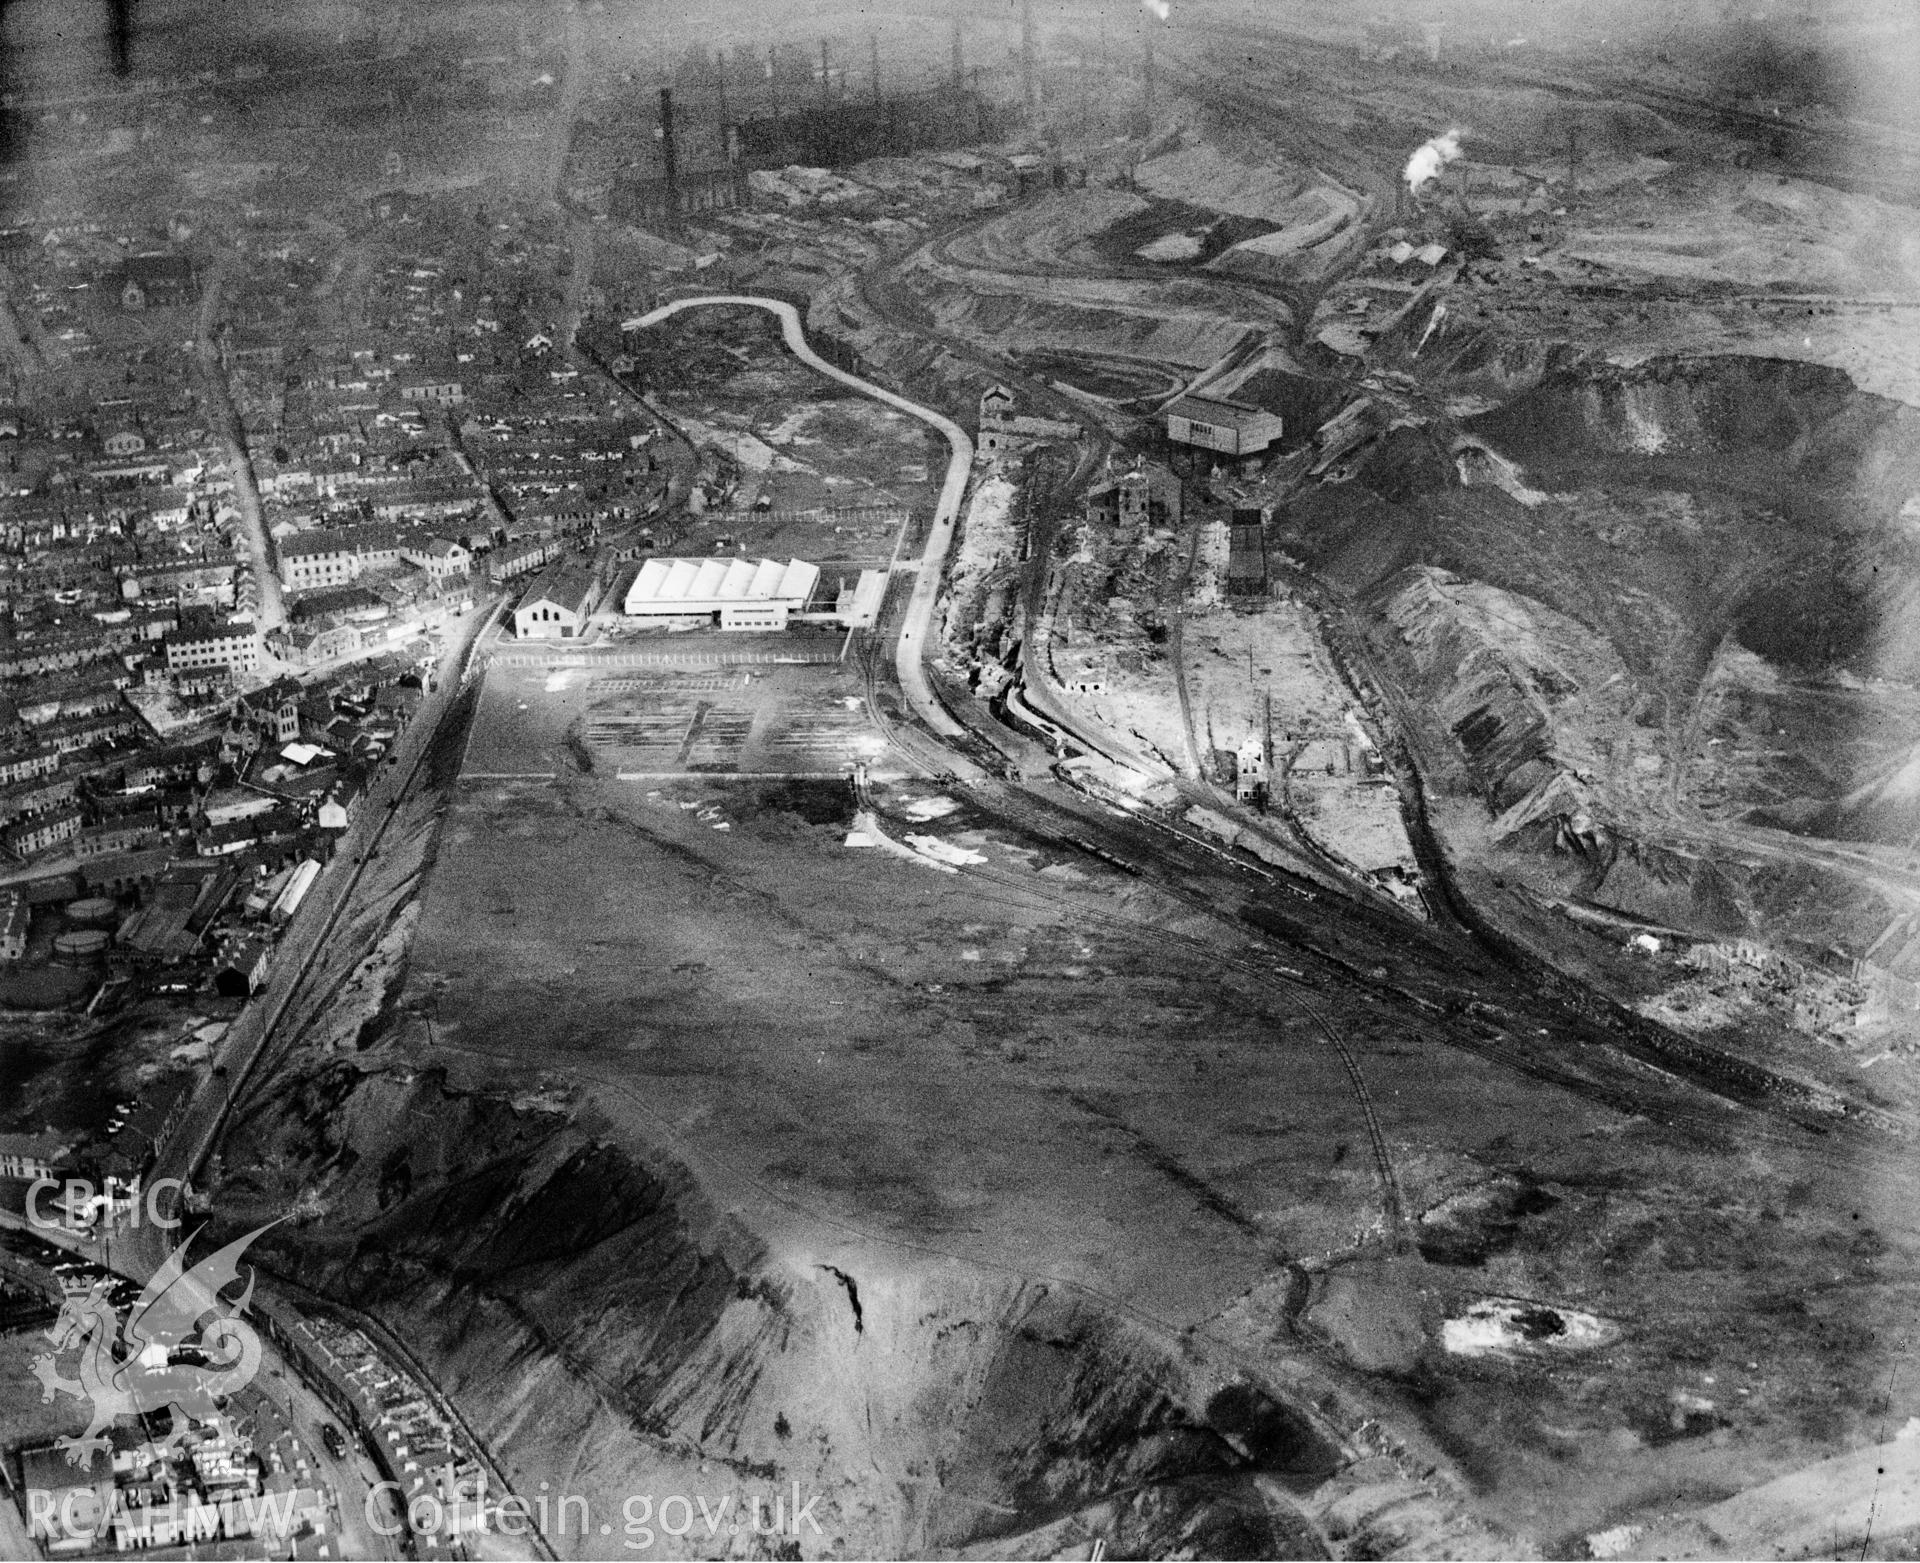 View of Dowlais Ironworks showing Dowlais great tip, oblique aerial view. 5?x4? black and white glass plate negative.